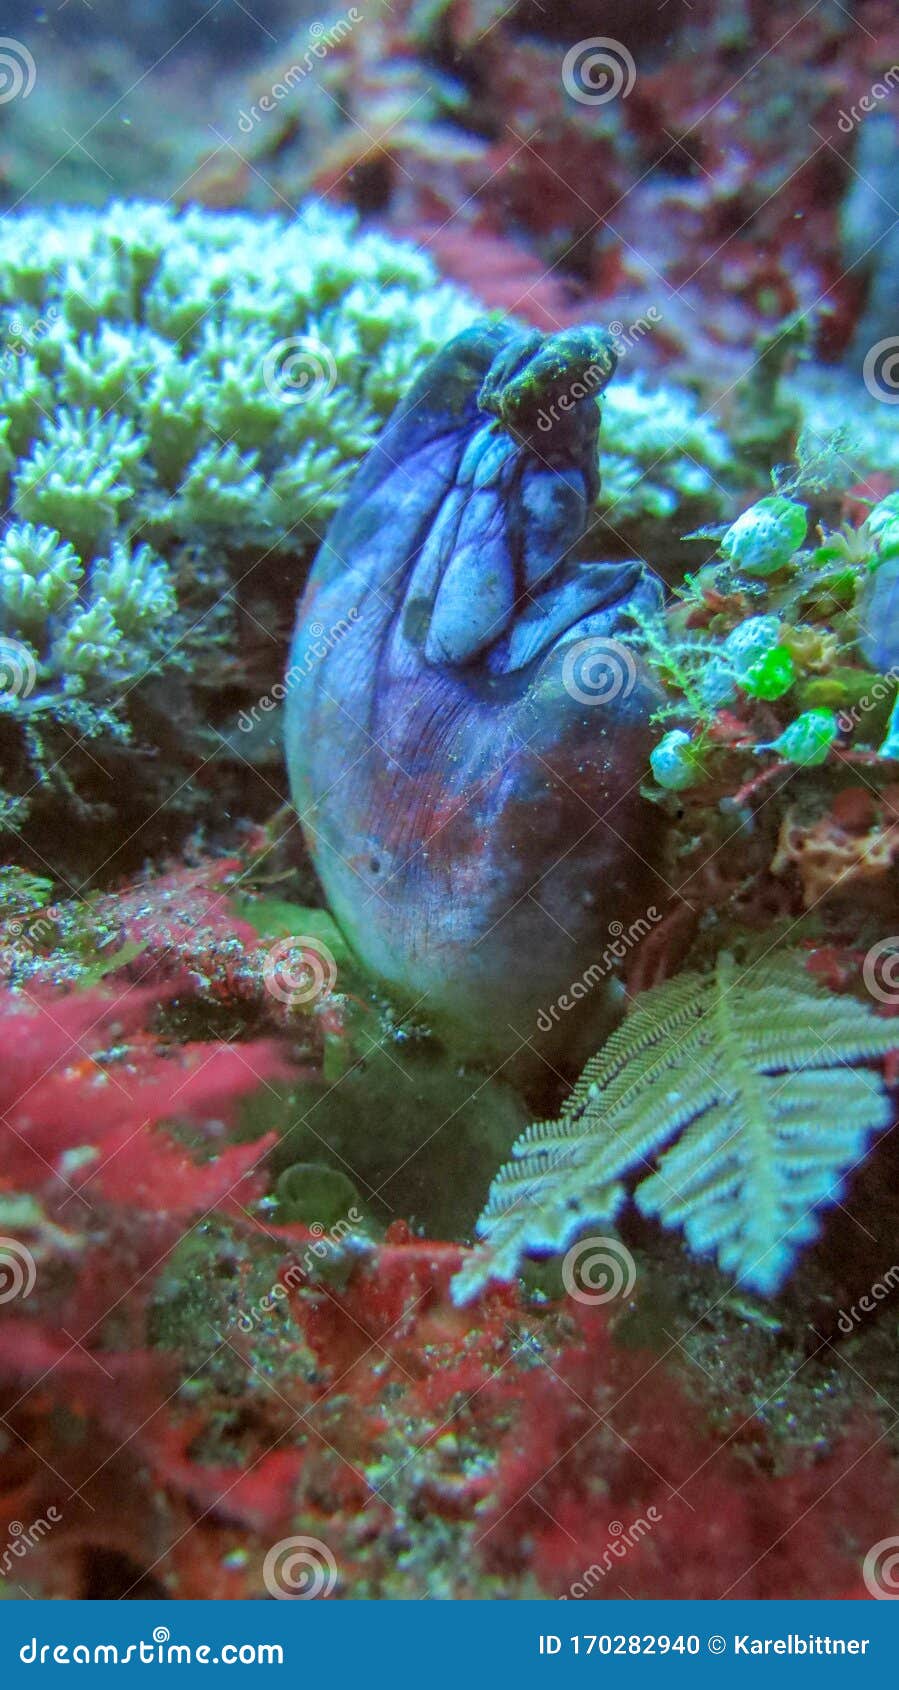 Polycarpa Aurata Also Known As The Ox Heart Ascidian The Gold Mouth Sea Squirt Or The Ink Spot